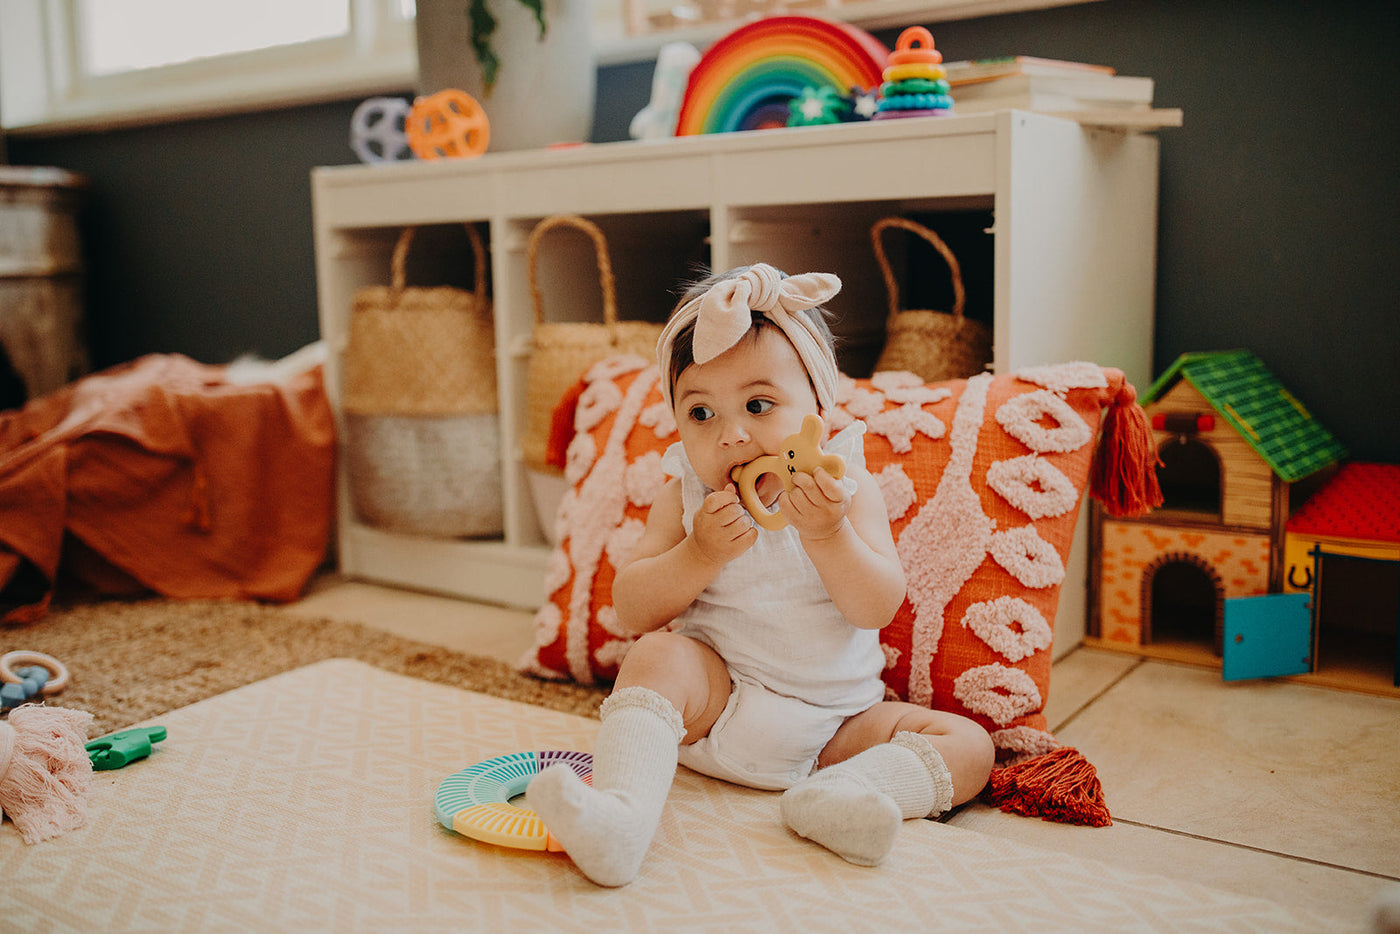 Baby playing with toys in a playroom